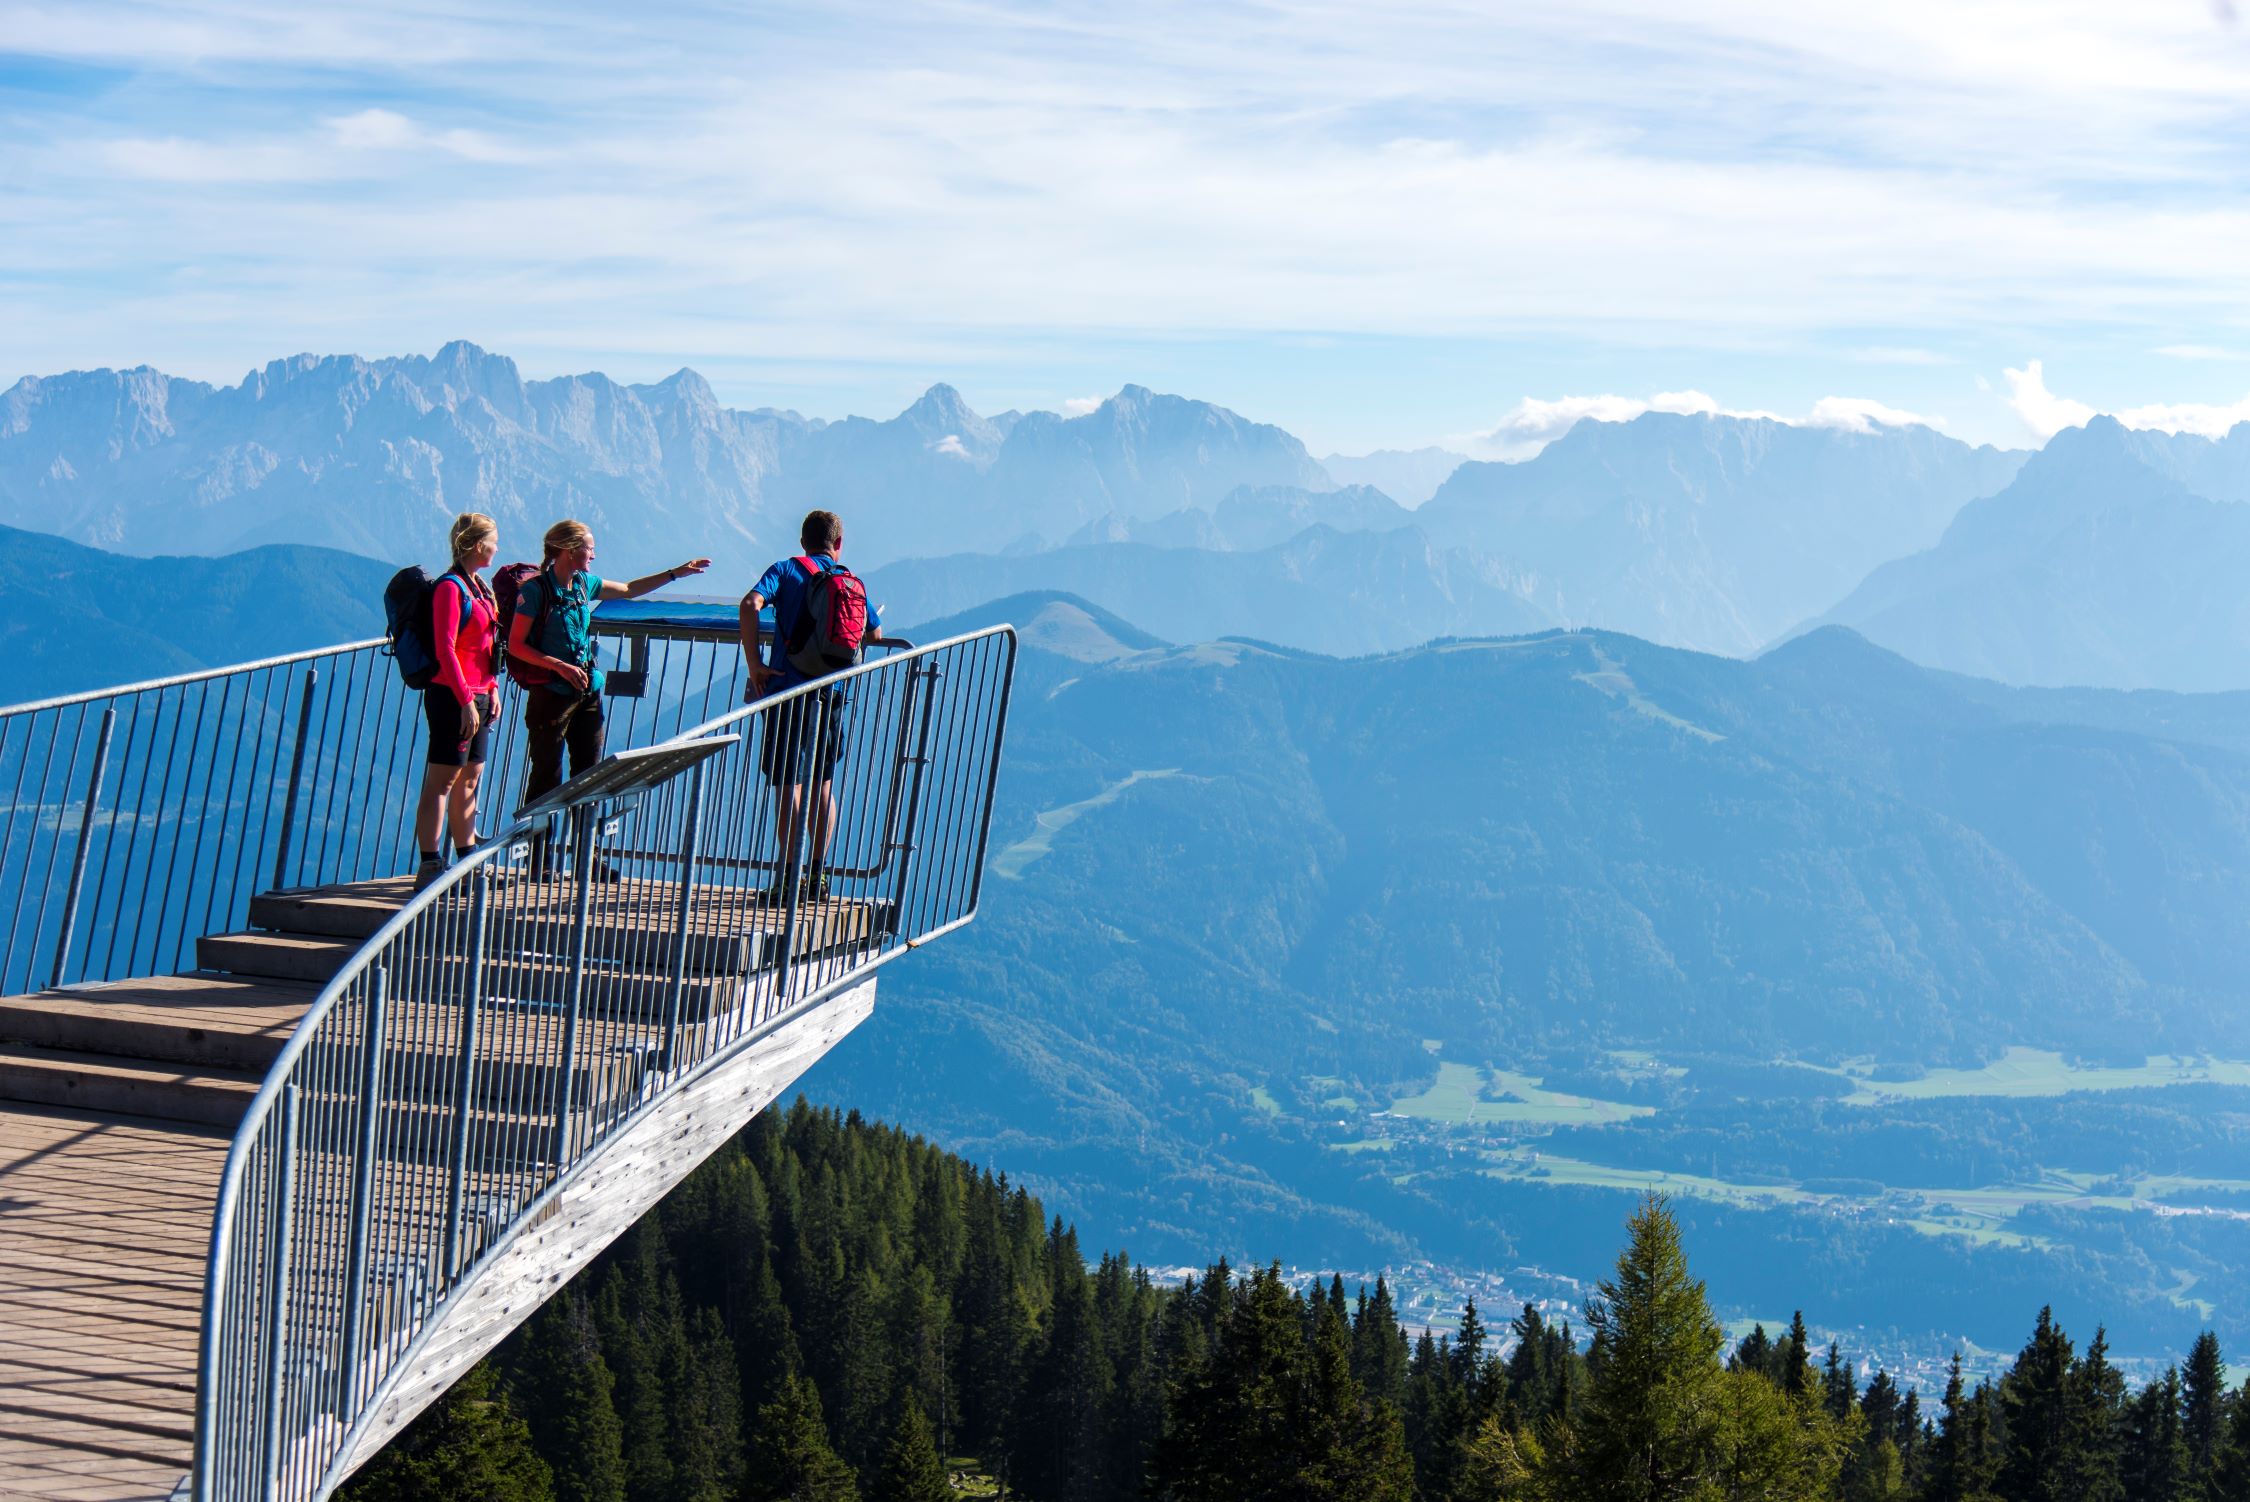 Viewing platform in the mountains